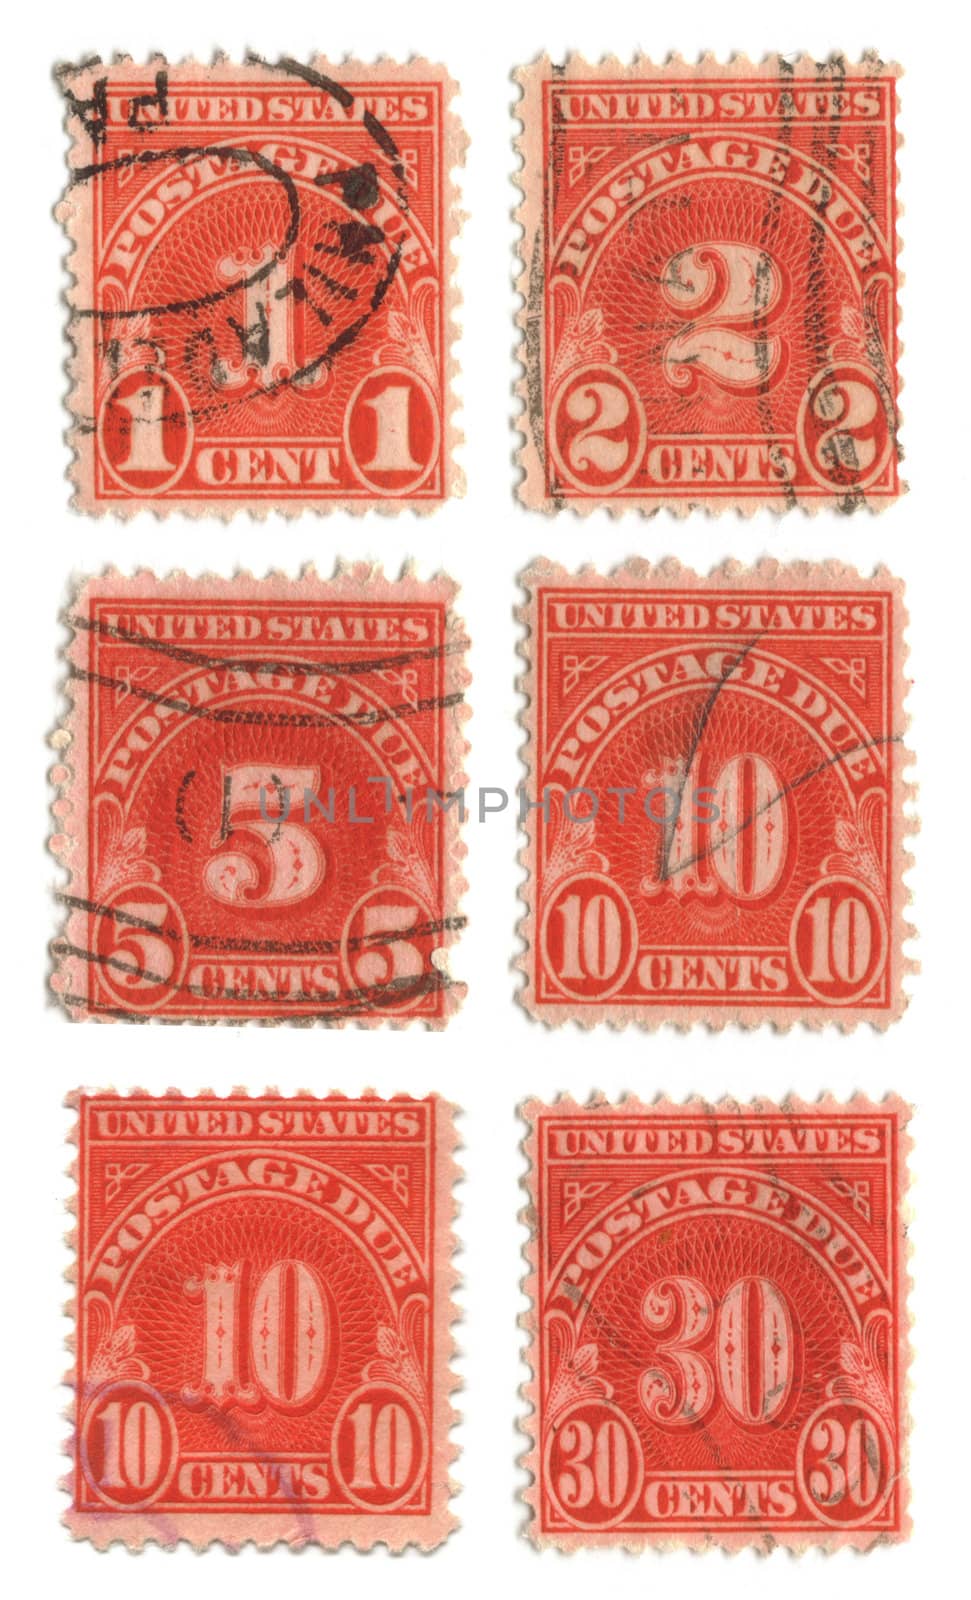 old postage stamps from USA by fambros